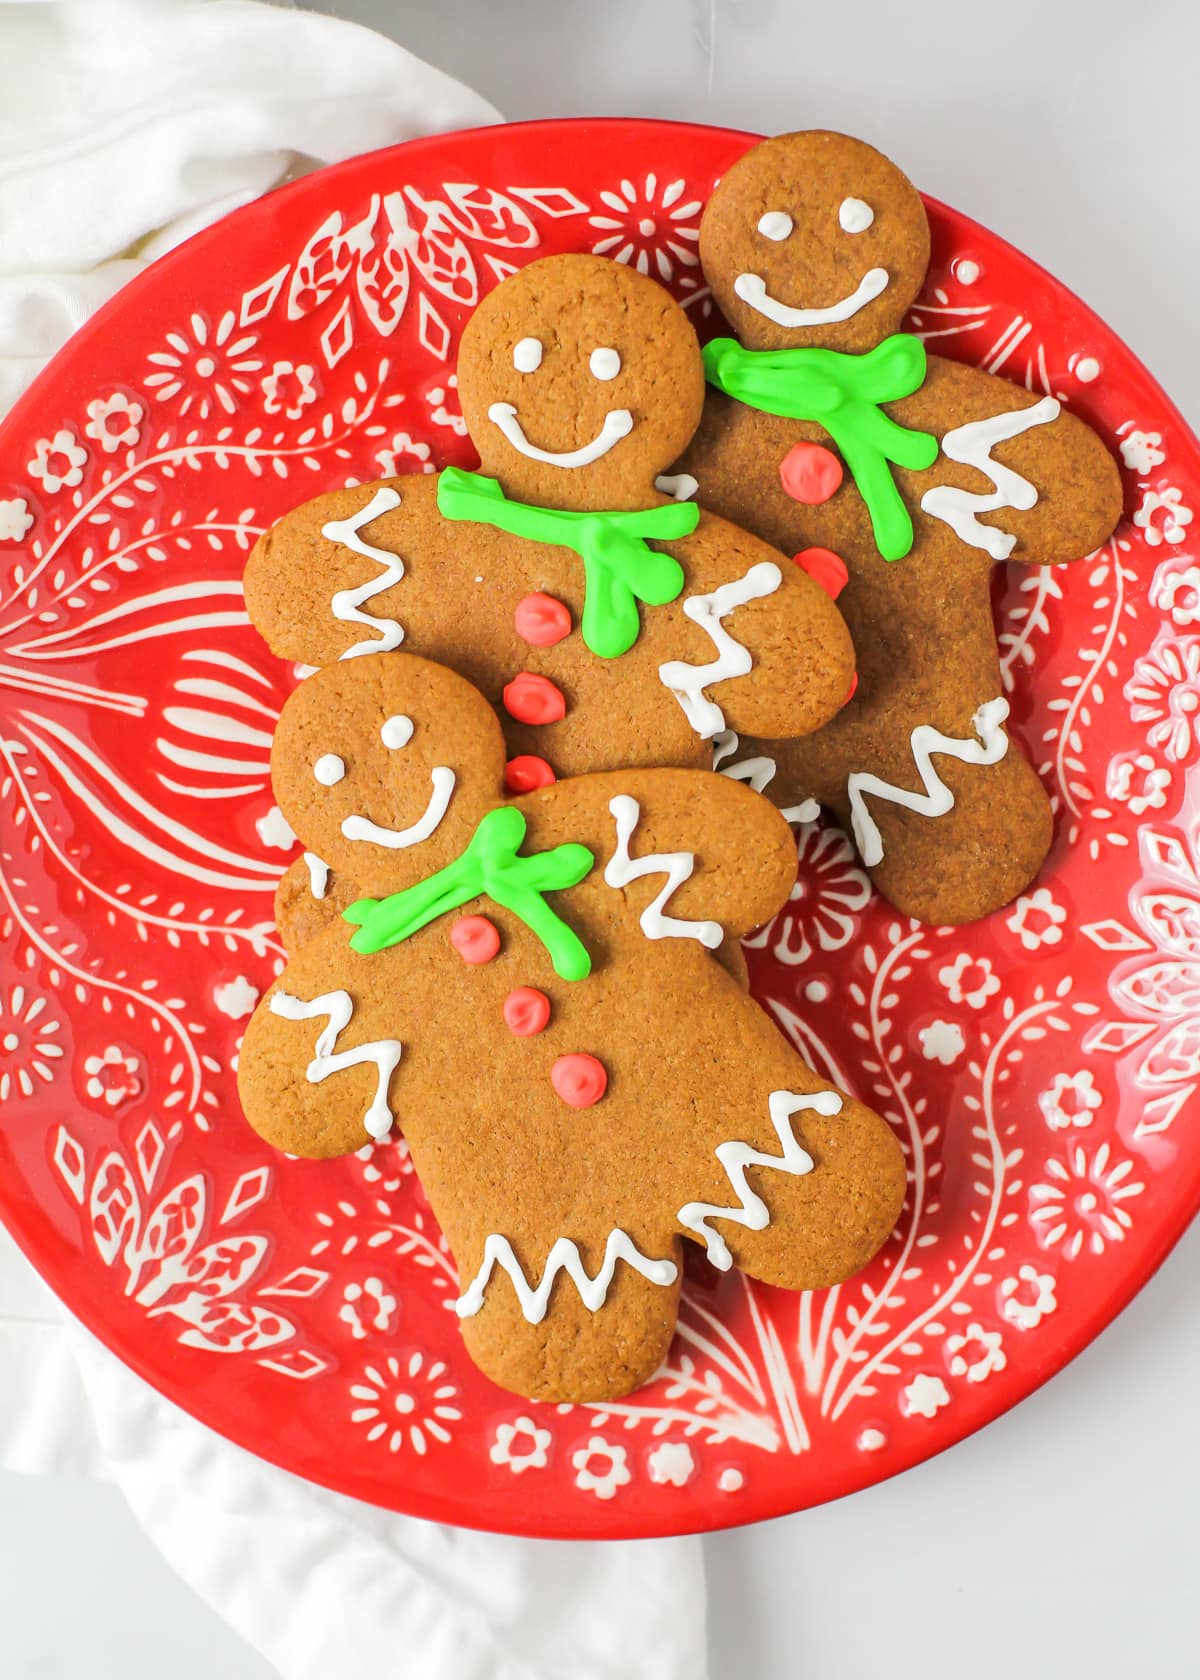 Three decorated gingerbread cookie recipe on a red plate.